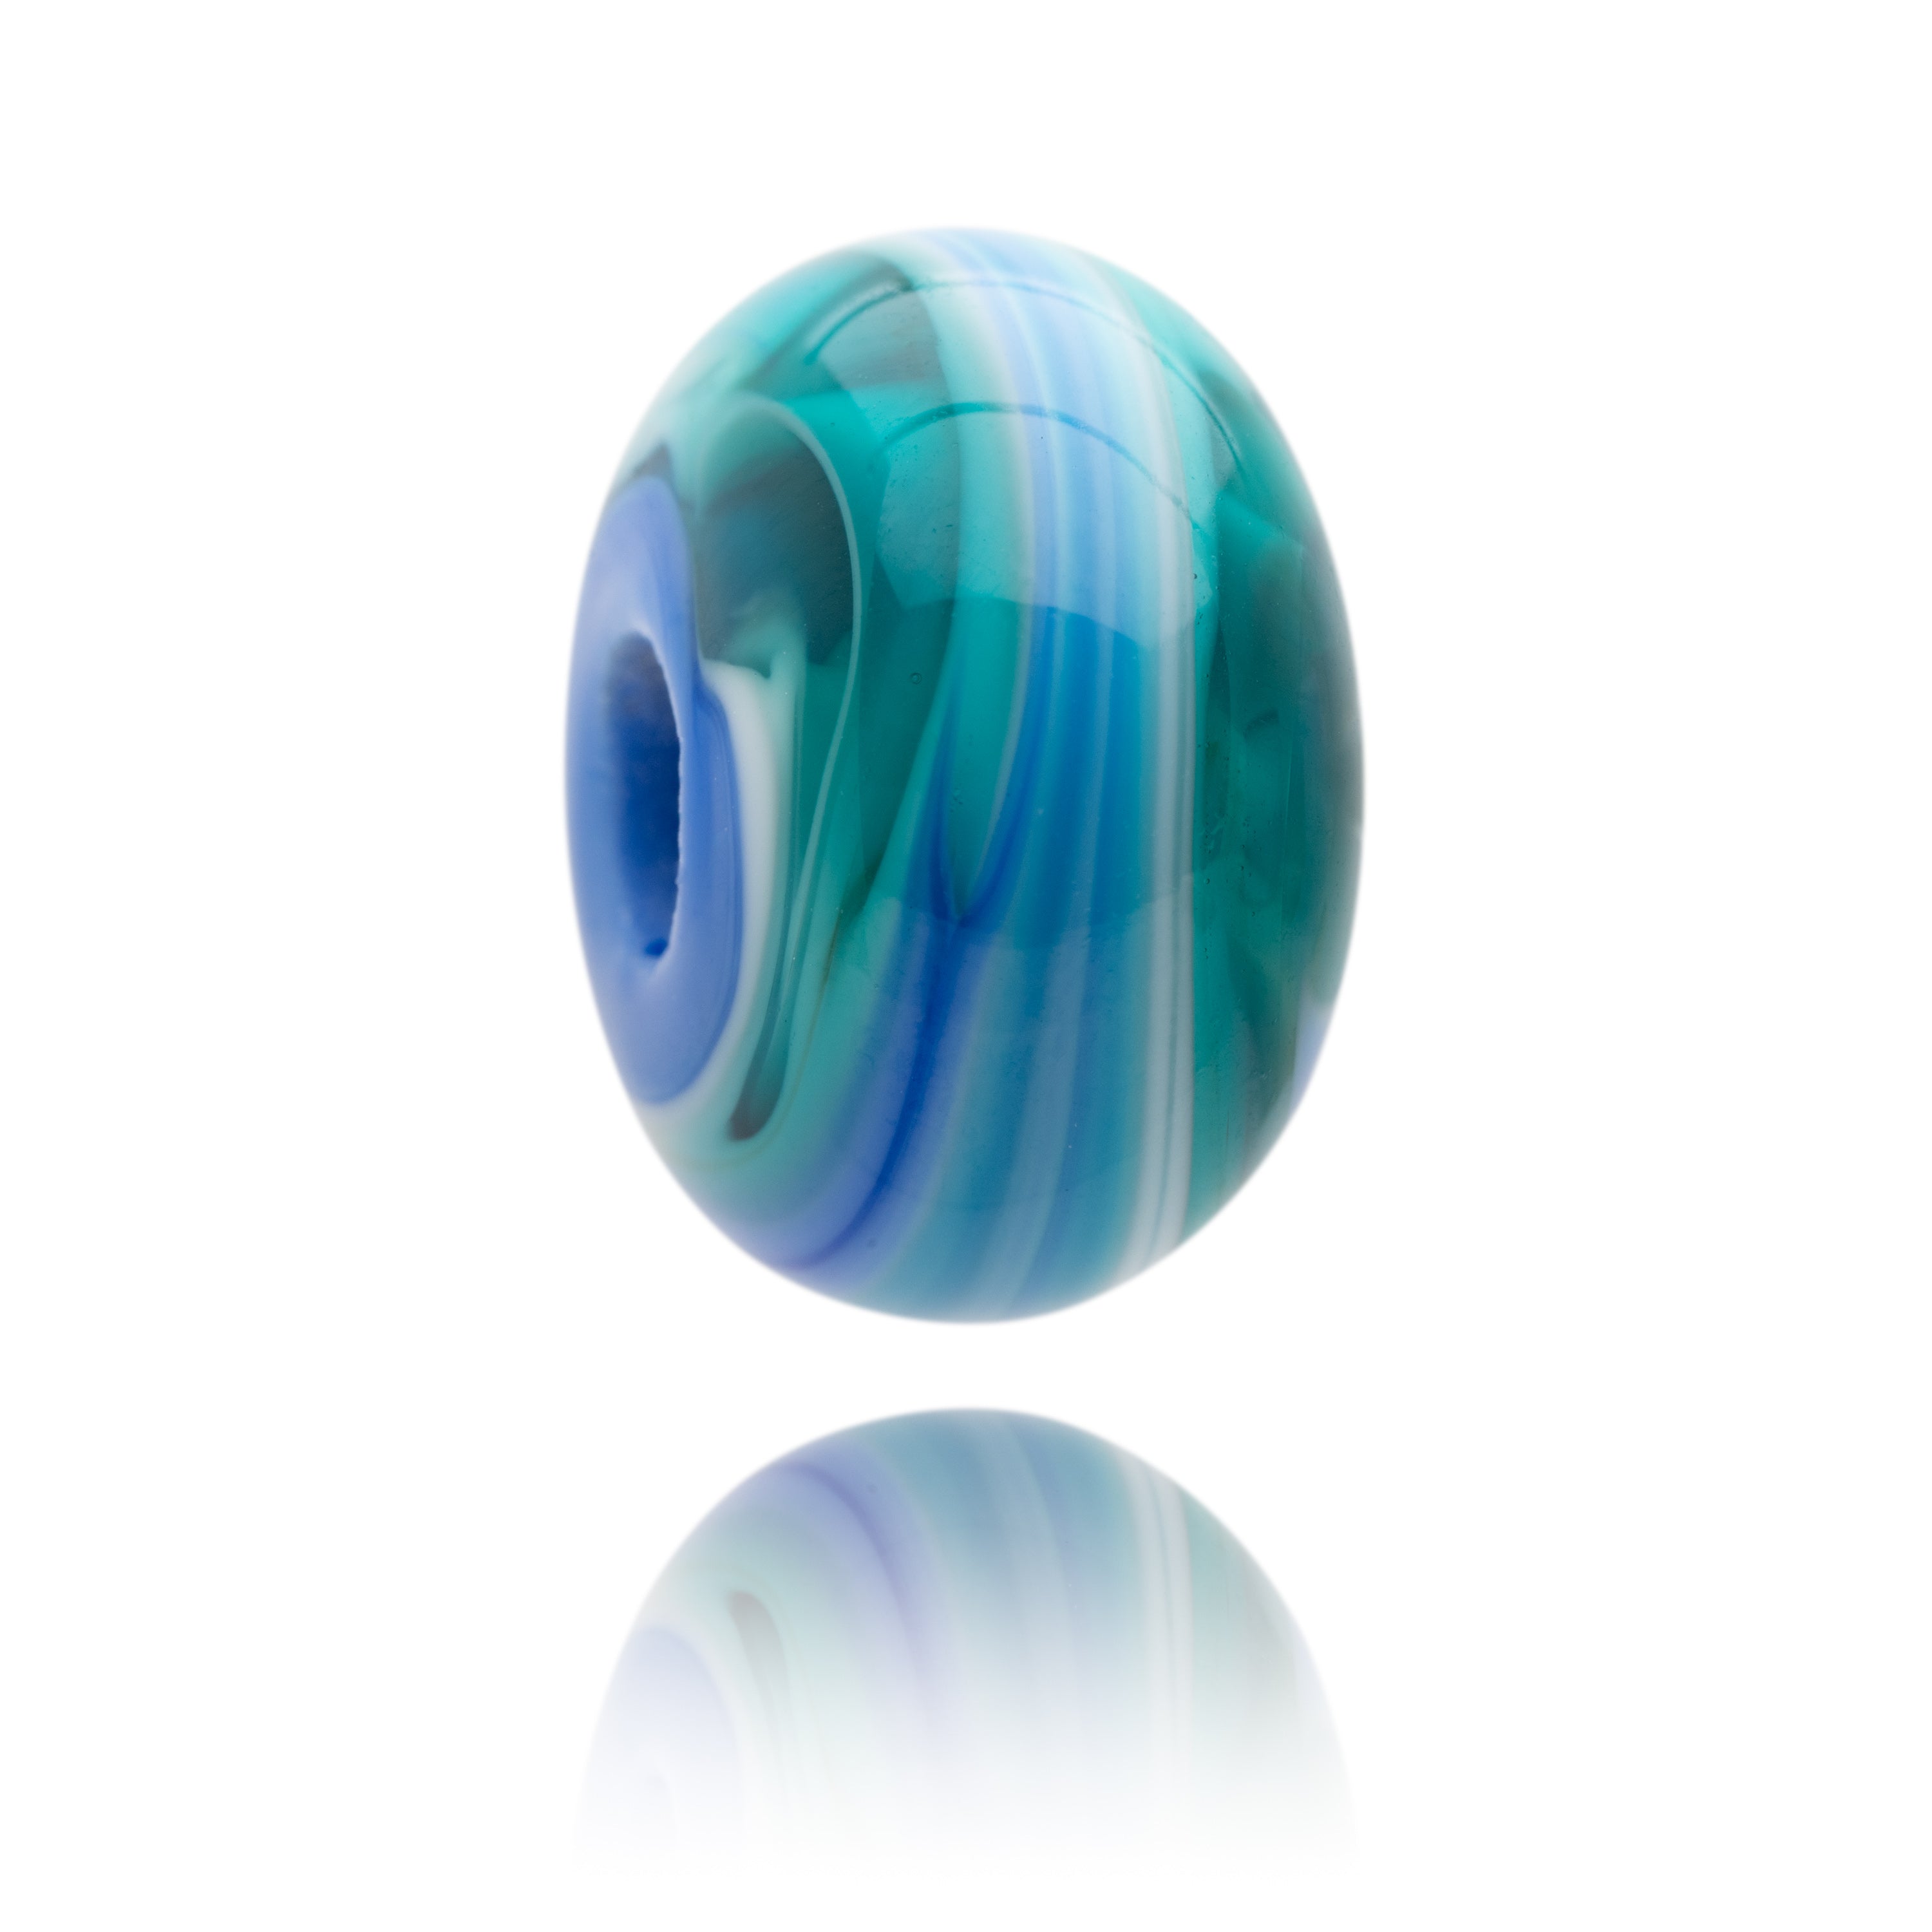 Blue and green swirling glass bead for Gorran Haven in Cornwall